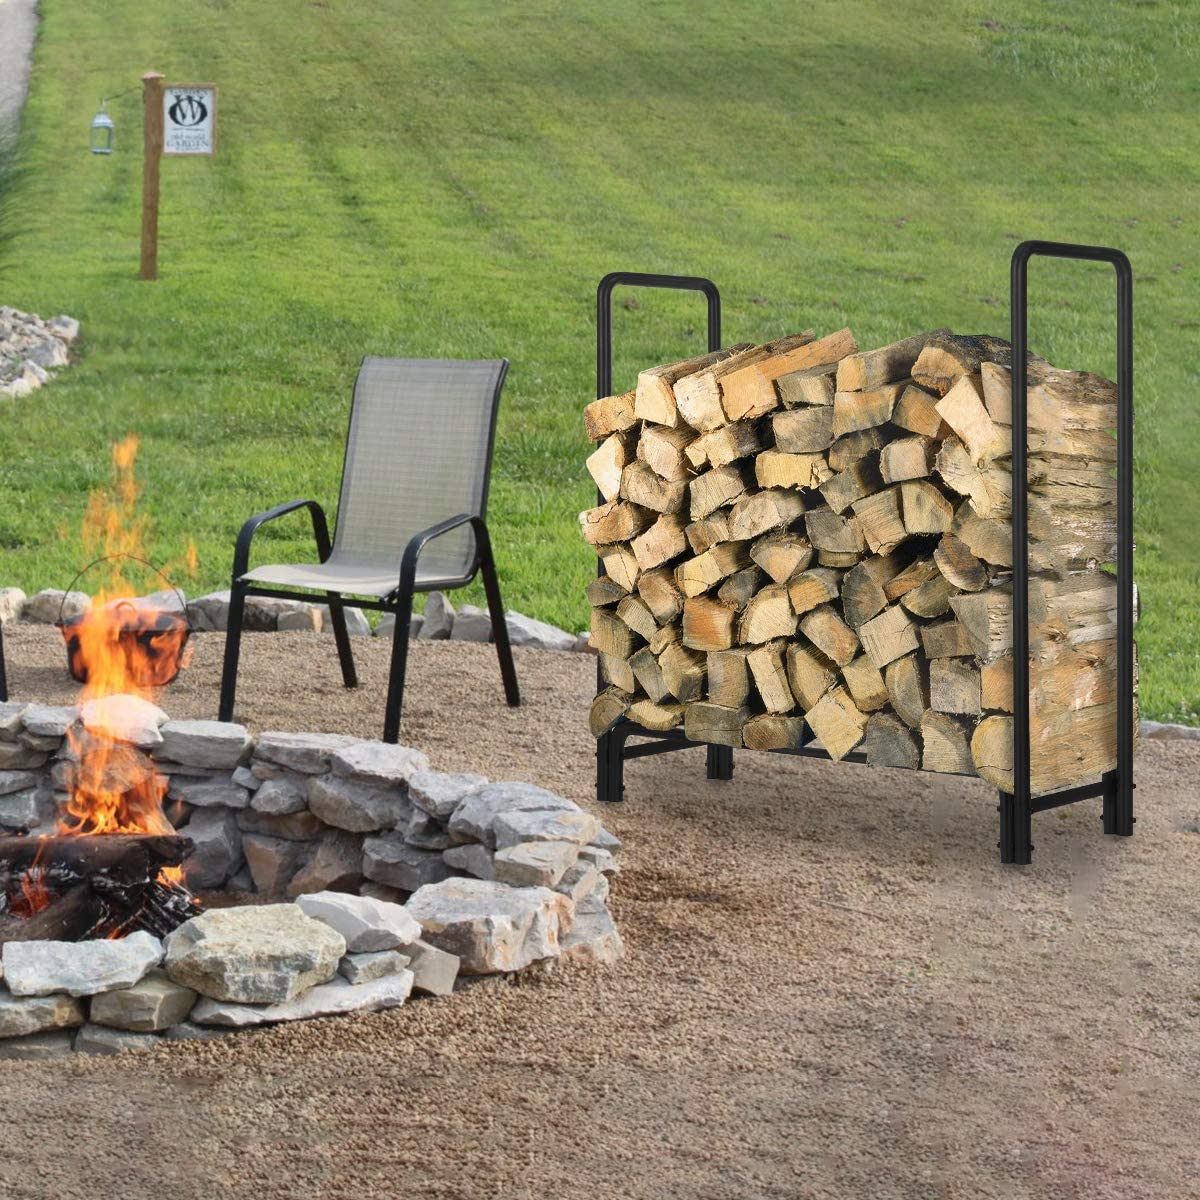 KINGSO Premium Firewood Rack Outdoor Super Easy to Assemble Fire Wood Rack 4 Foot 